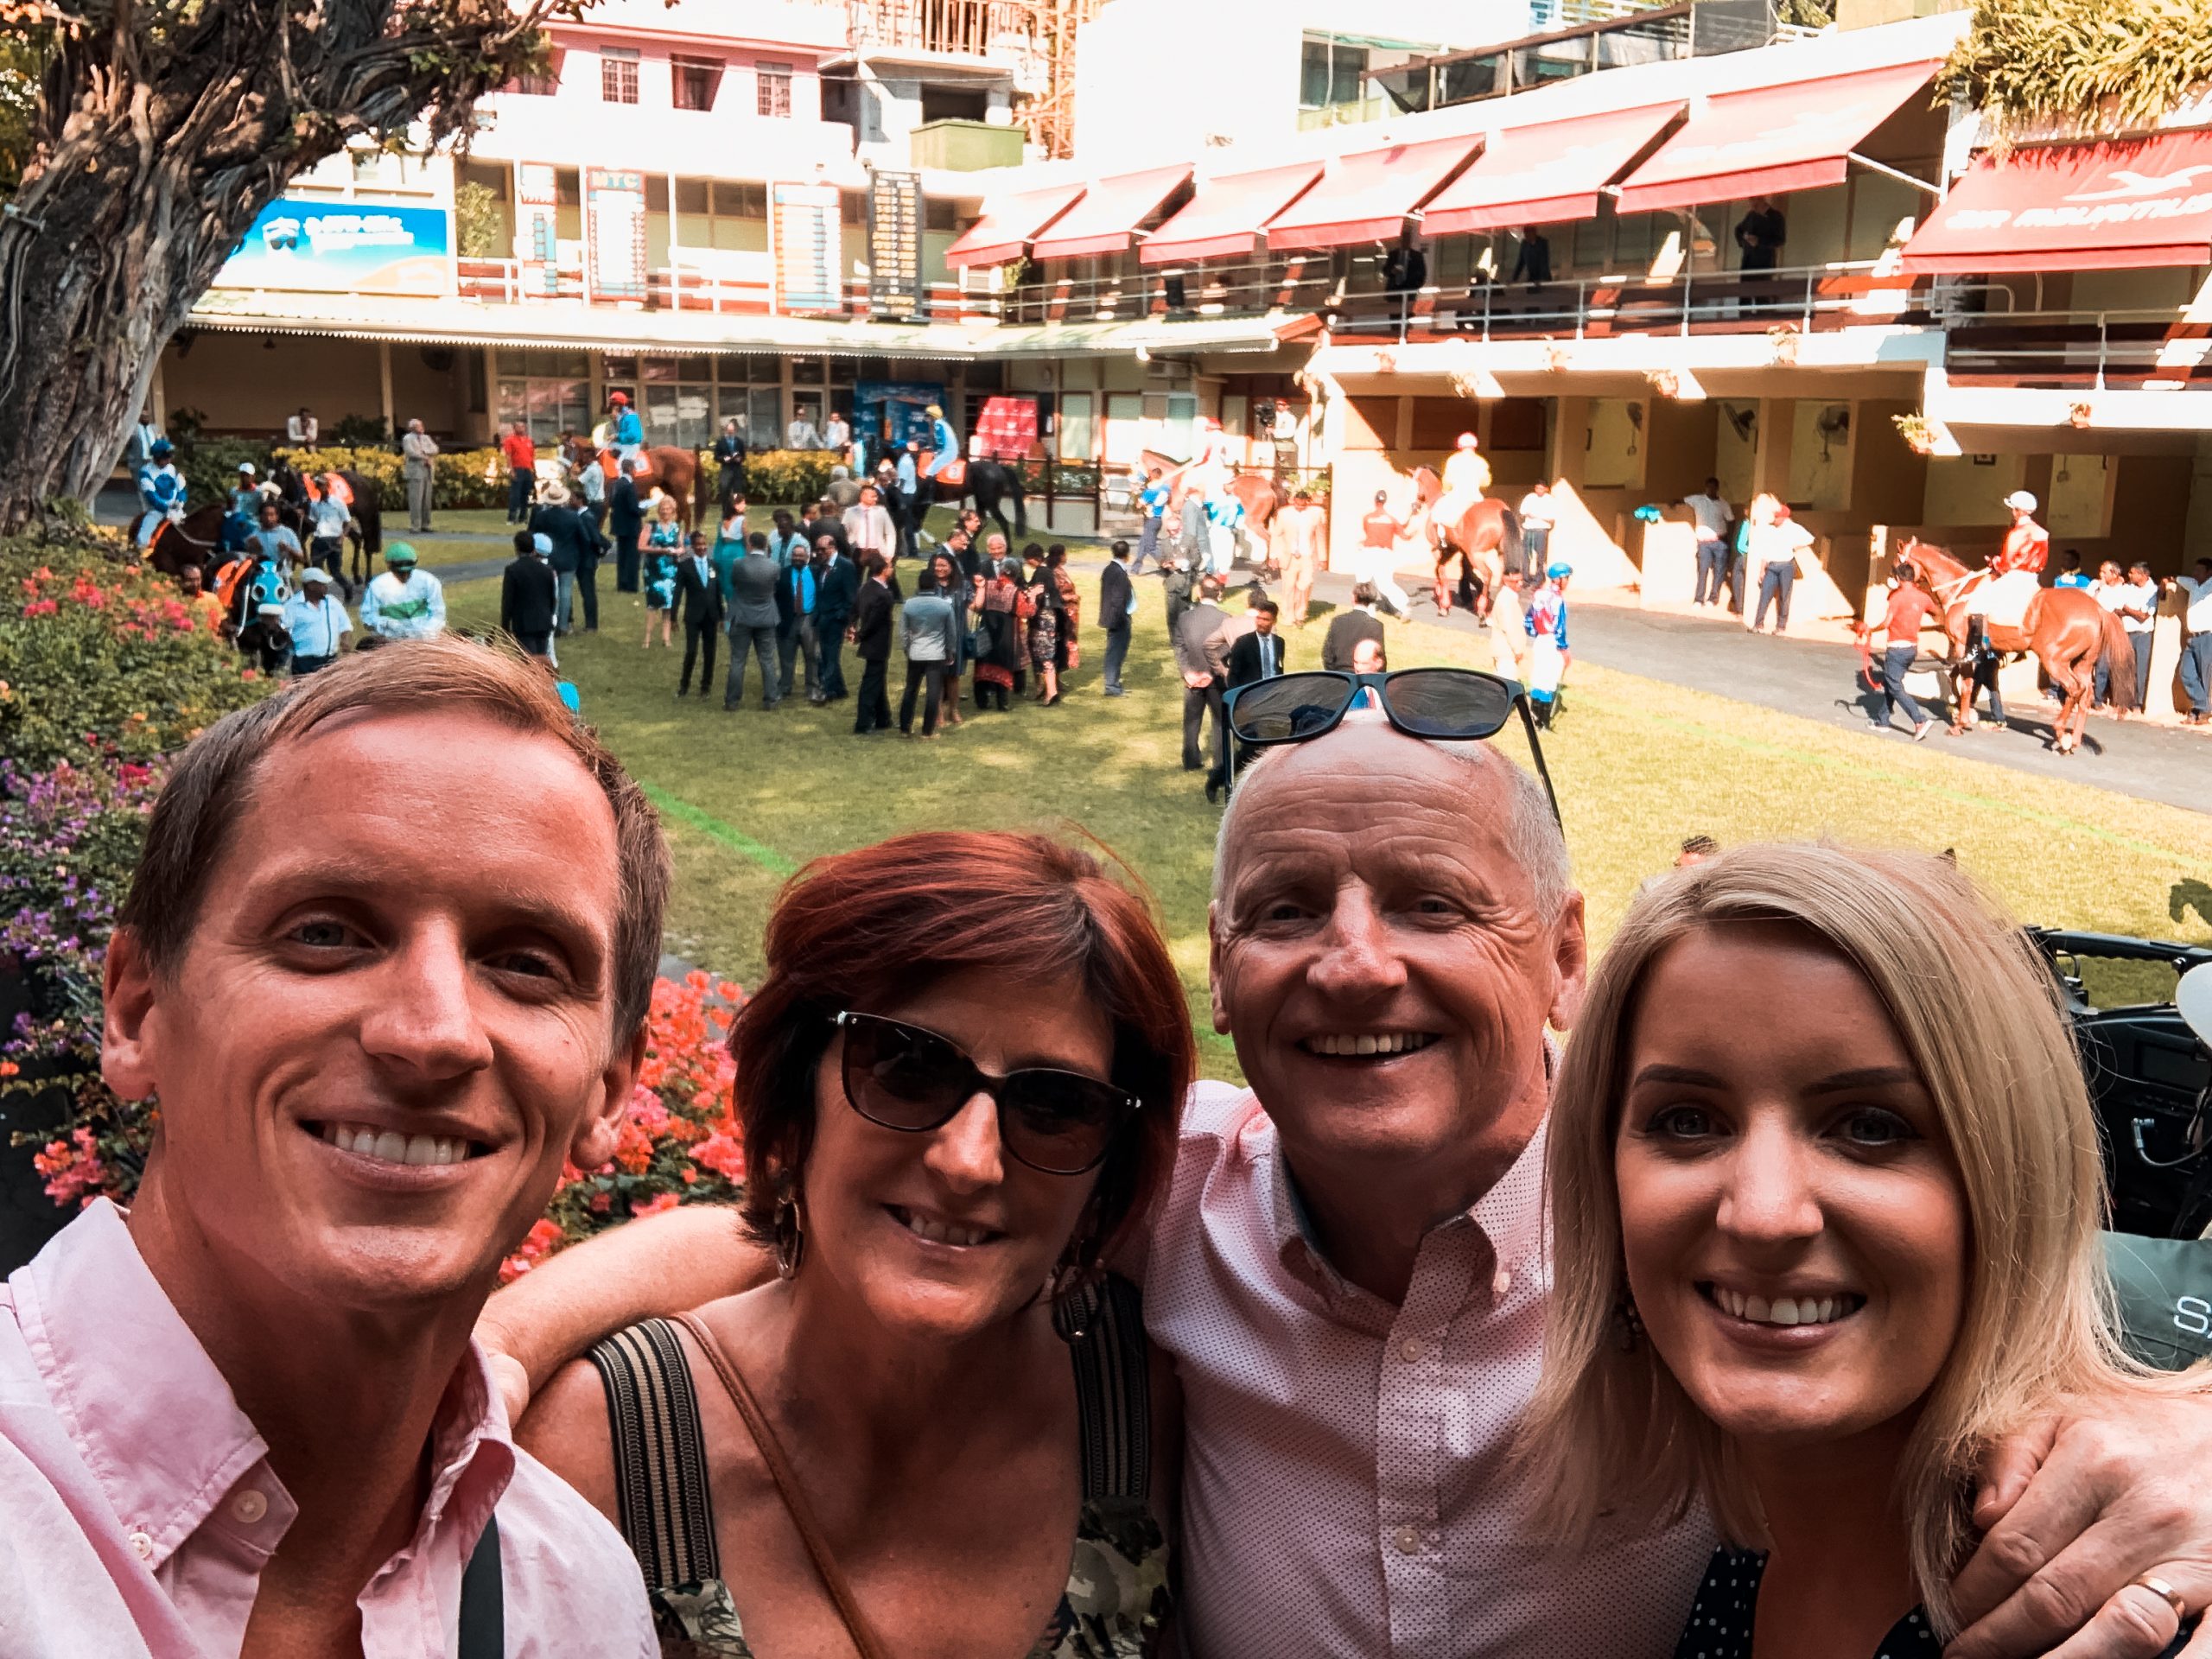 David Simpson and family horse racing at Champ de Mars in Mauritius, Africa. A day at Champ de Mars